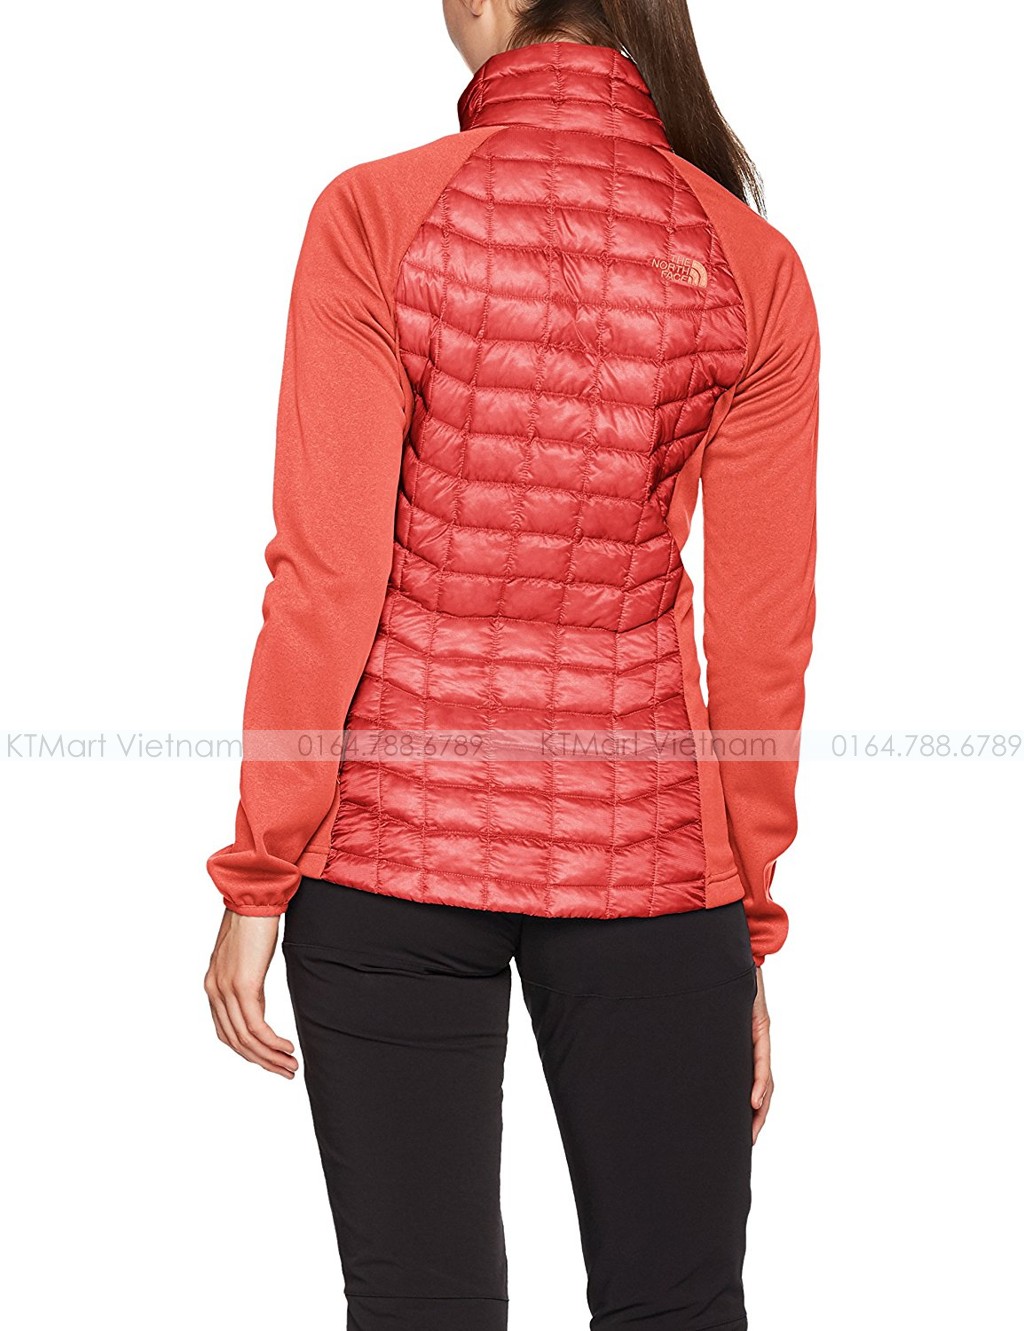 The North Face Women’s ThermoBall Hybrid Full Zip 2XKI The North Face ktmart.vn 5